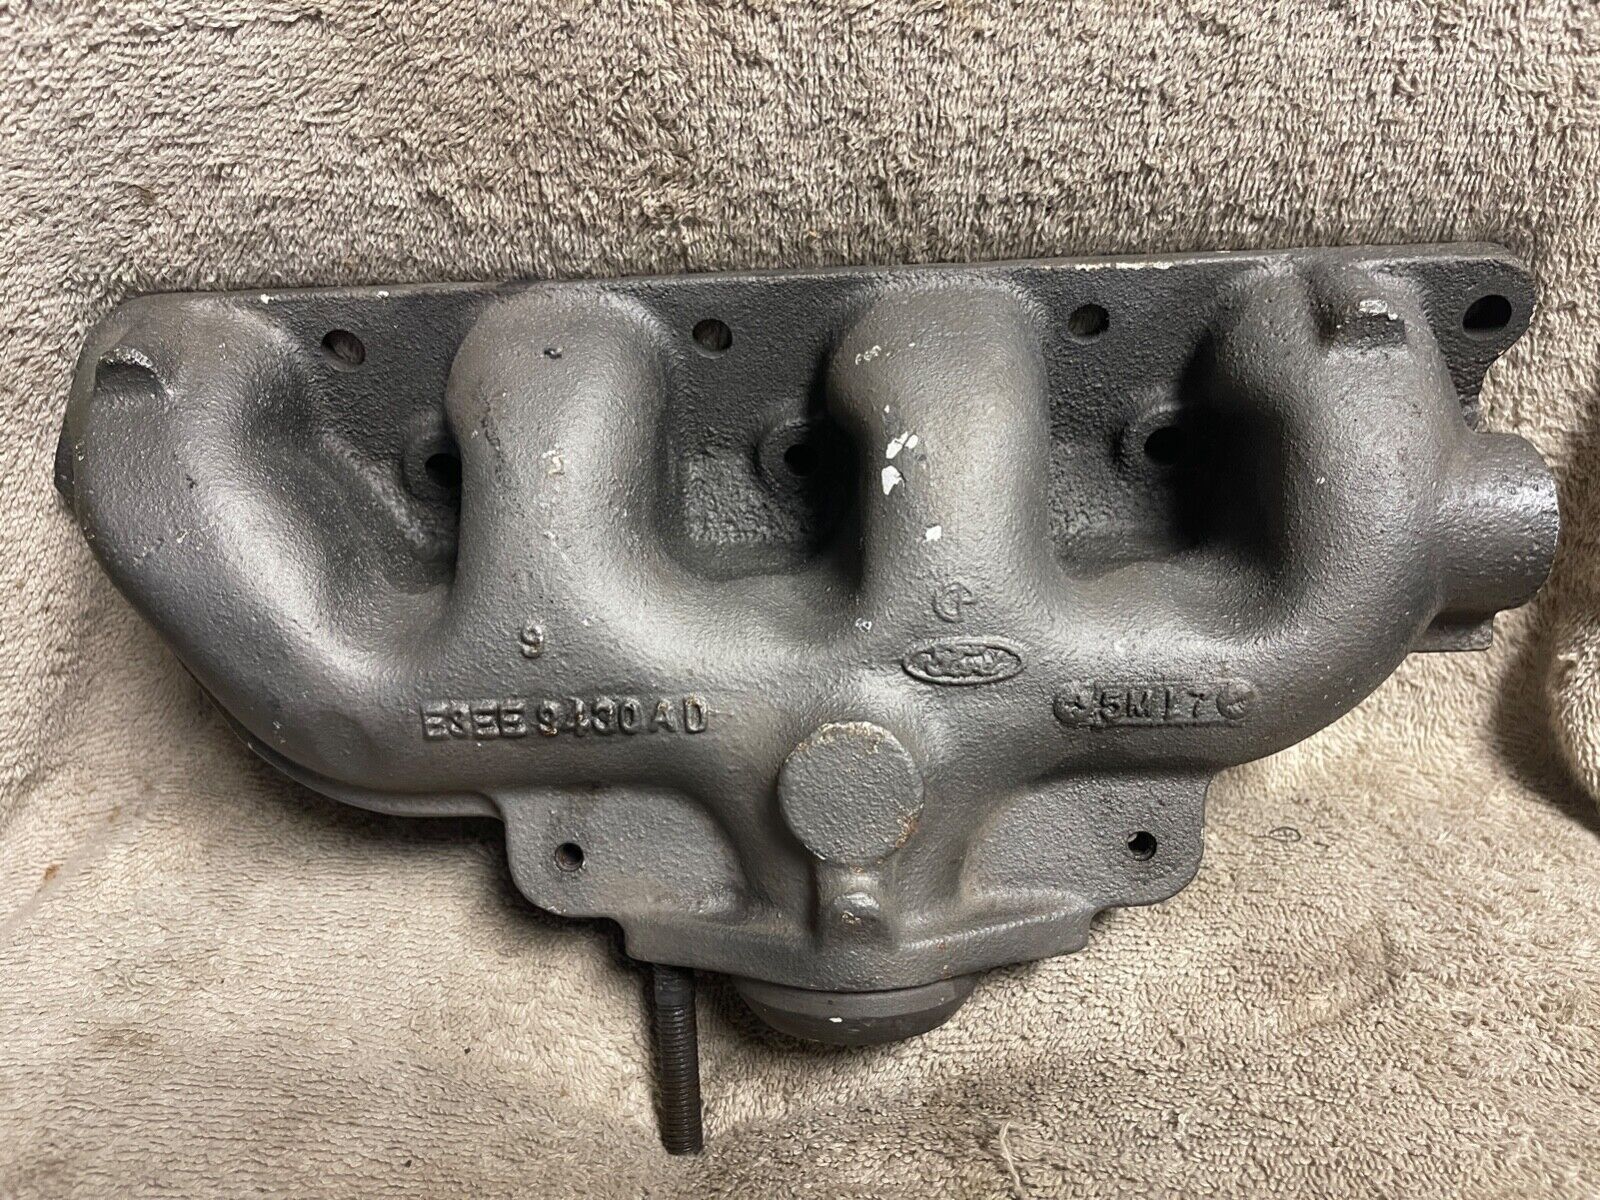 NOS FORD E3EE-9430AD 1984-86 ESCORT EXP LN7 EXHAUST MANIFOLD CAST IRON W/O TURBO